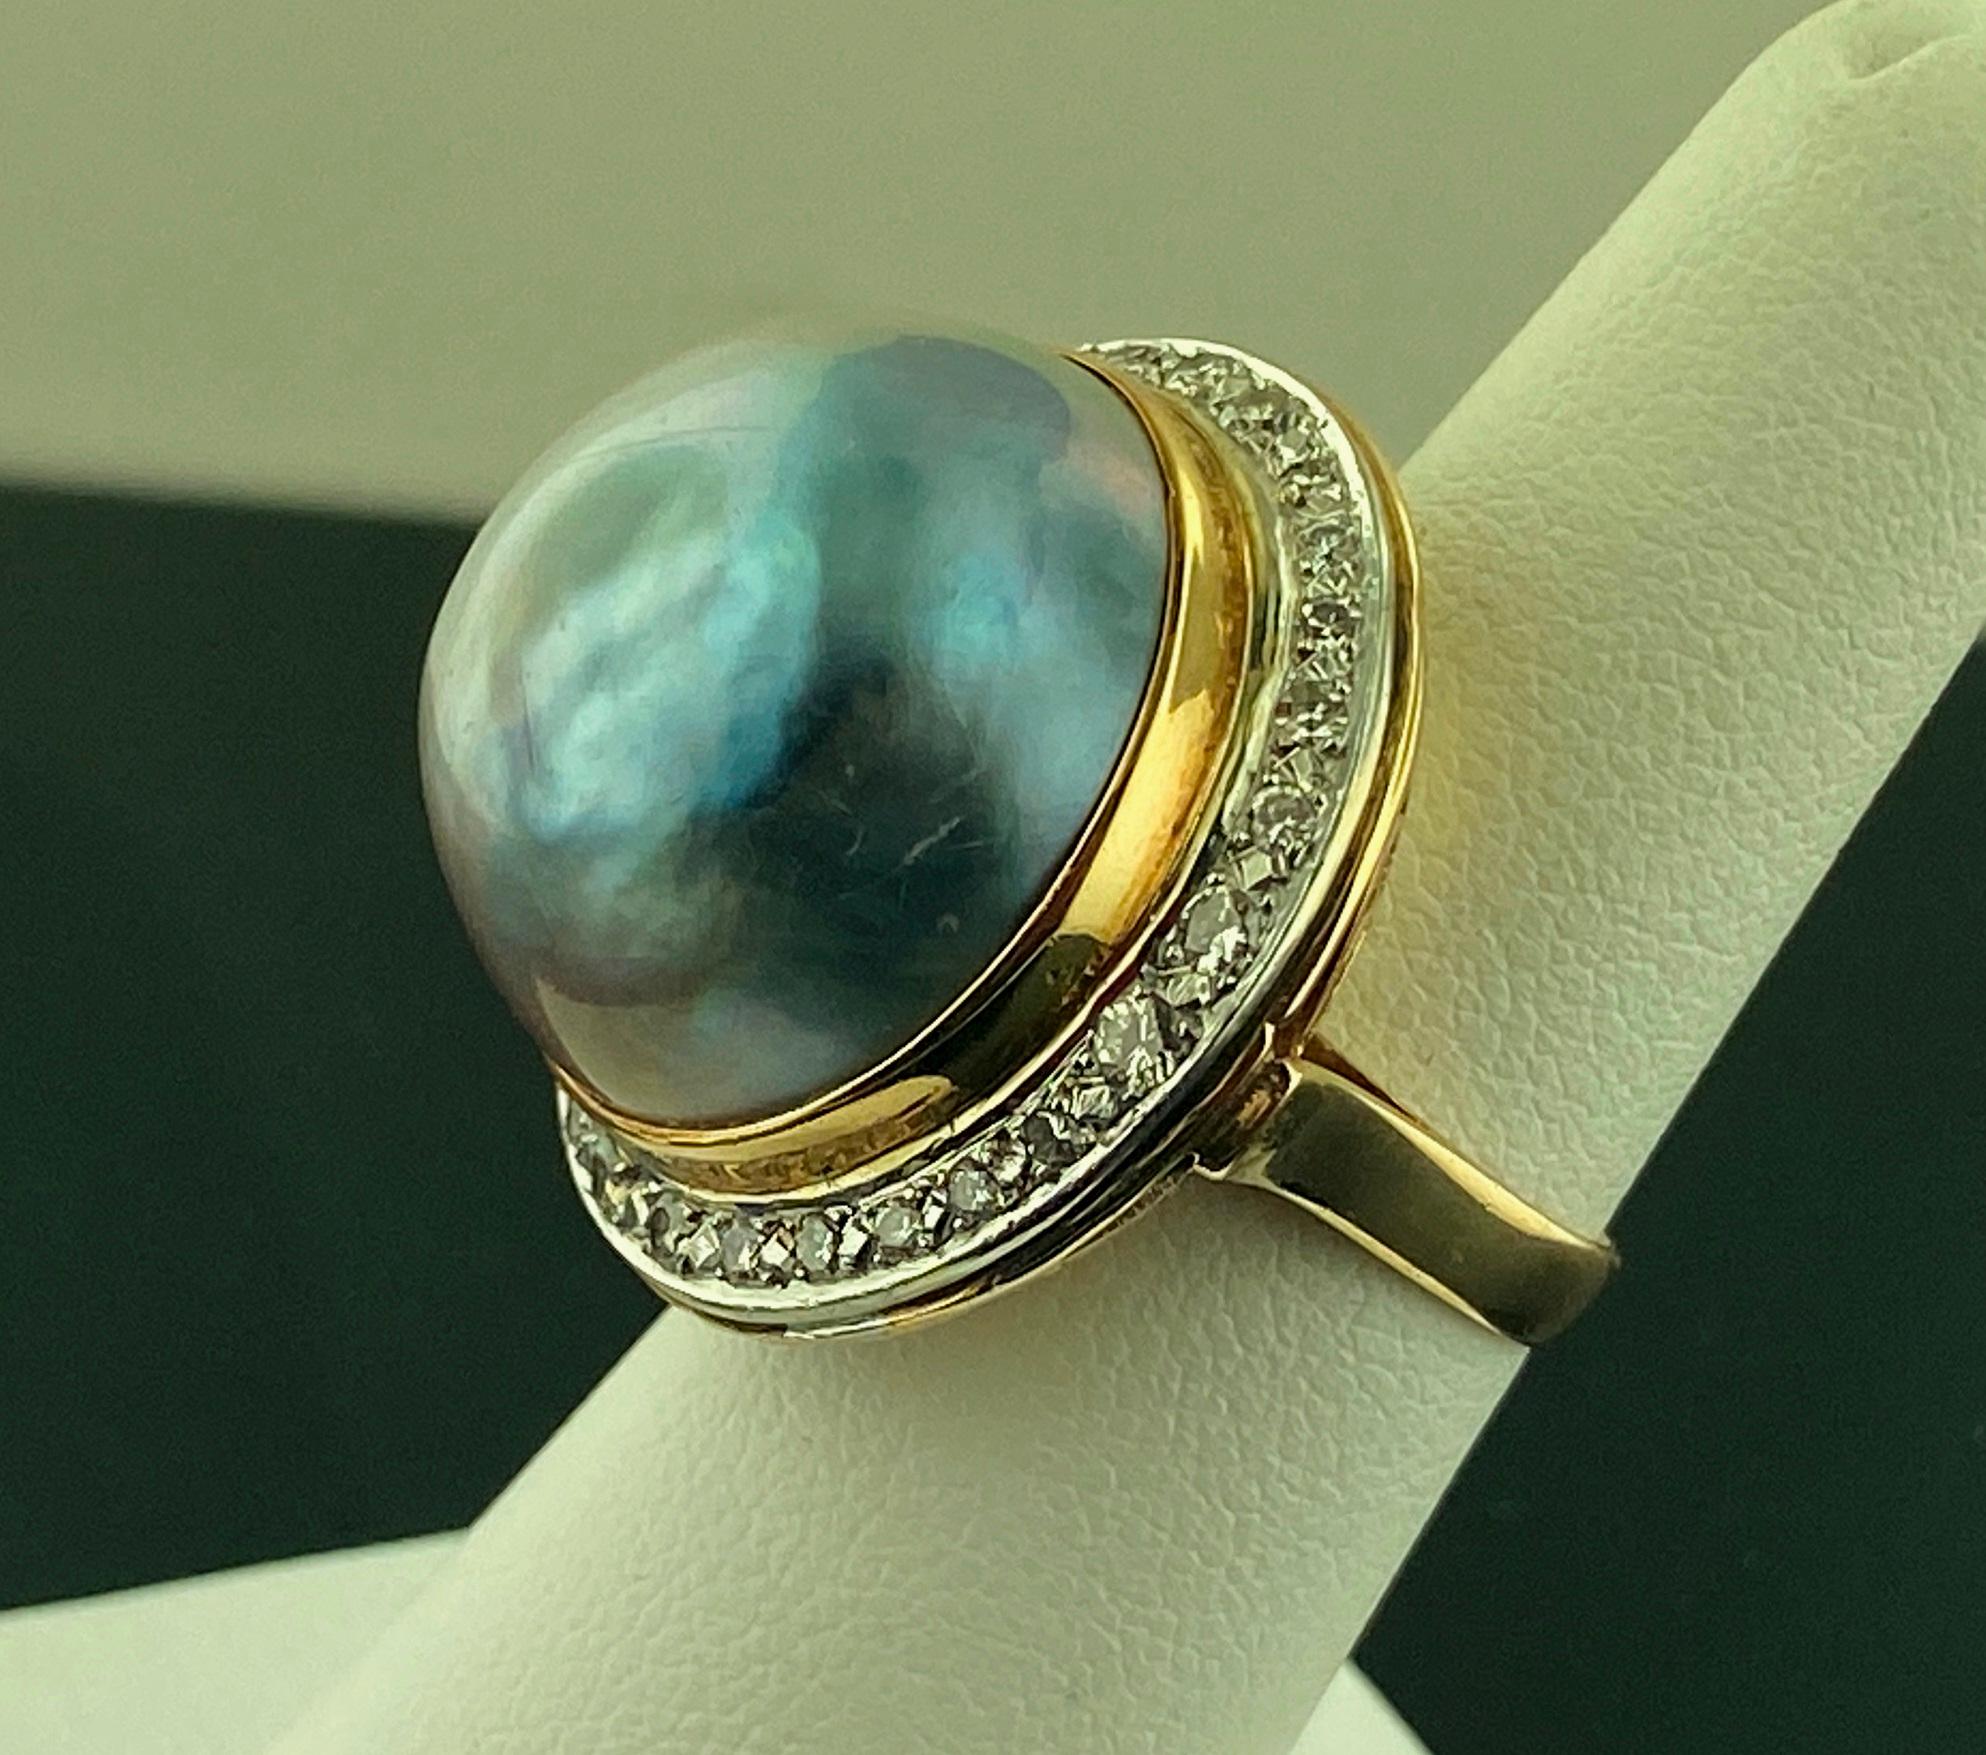 Set in 14 karat yellow gold is one 20 mm MABE Pearl, blue-gray in color, with 24 Round brilliant cut diamonds weighing approximately 0.50 carats.  Ring size is 5.5